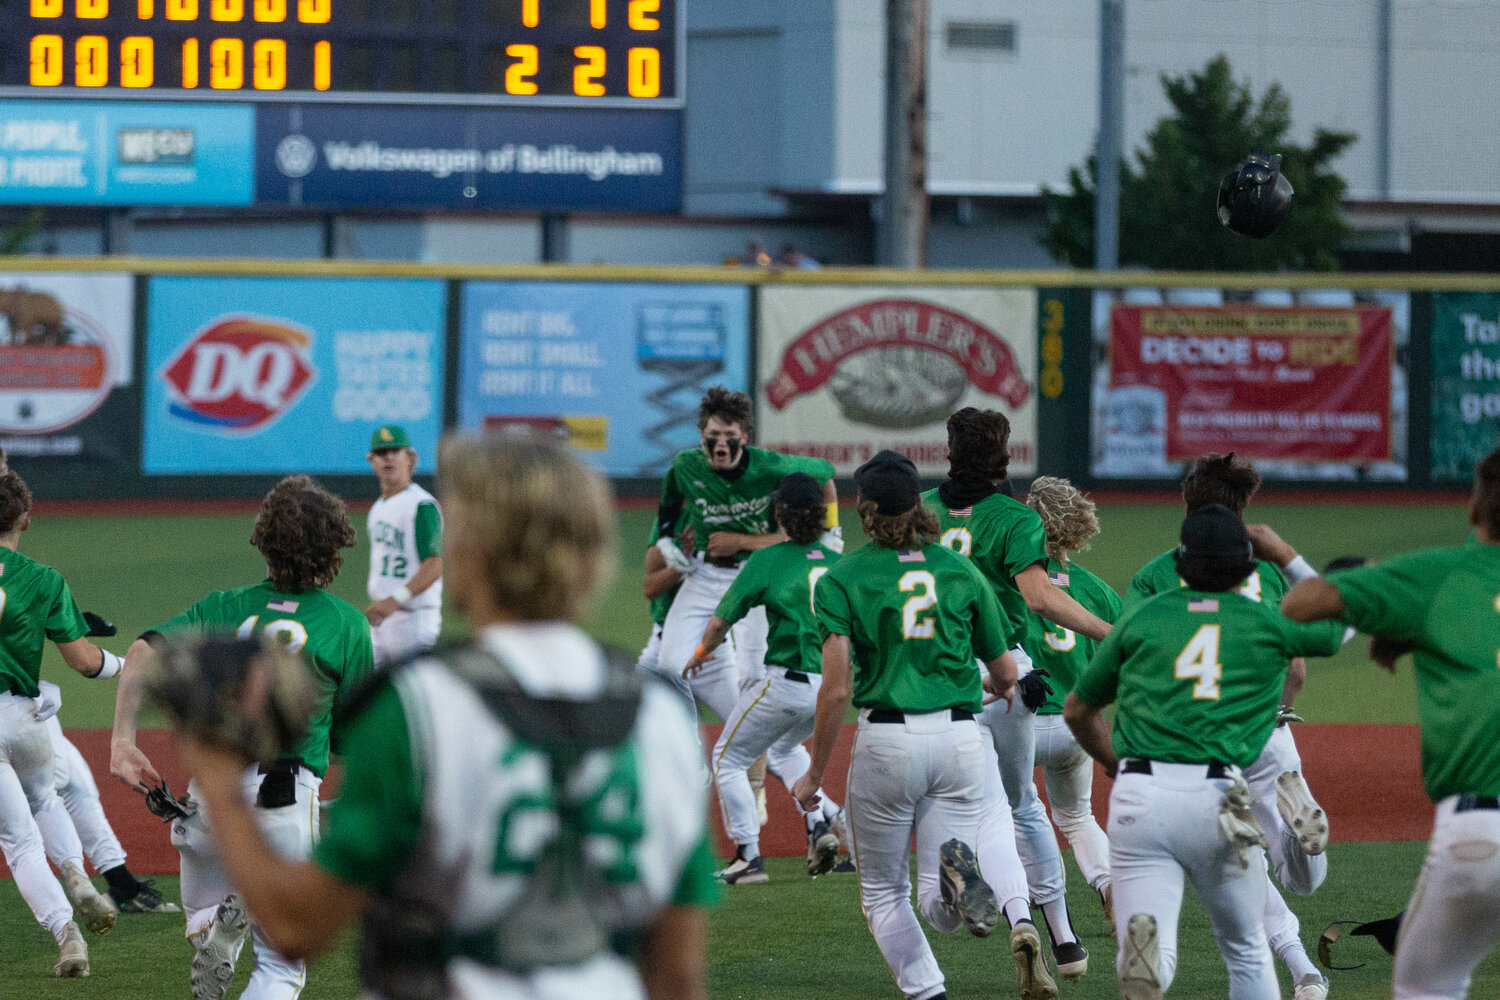 Tumwater sprints out on the bases to find Brayden Oram after his walk off hit against Lynden in the 2A state title game at Joe Martin Stadium in Bellingham May 27.